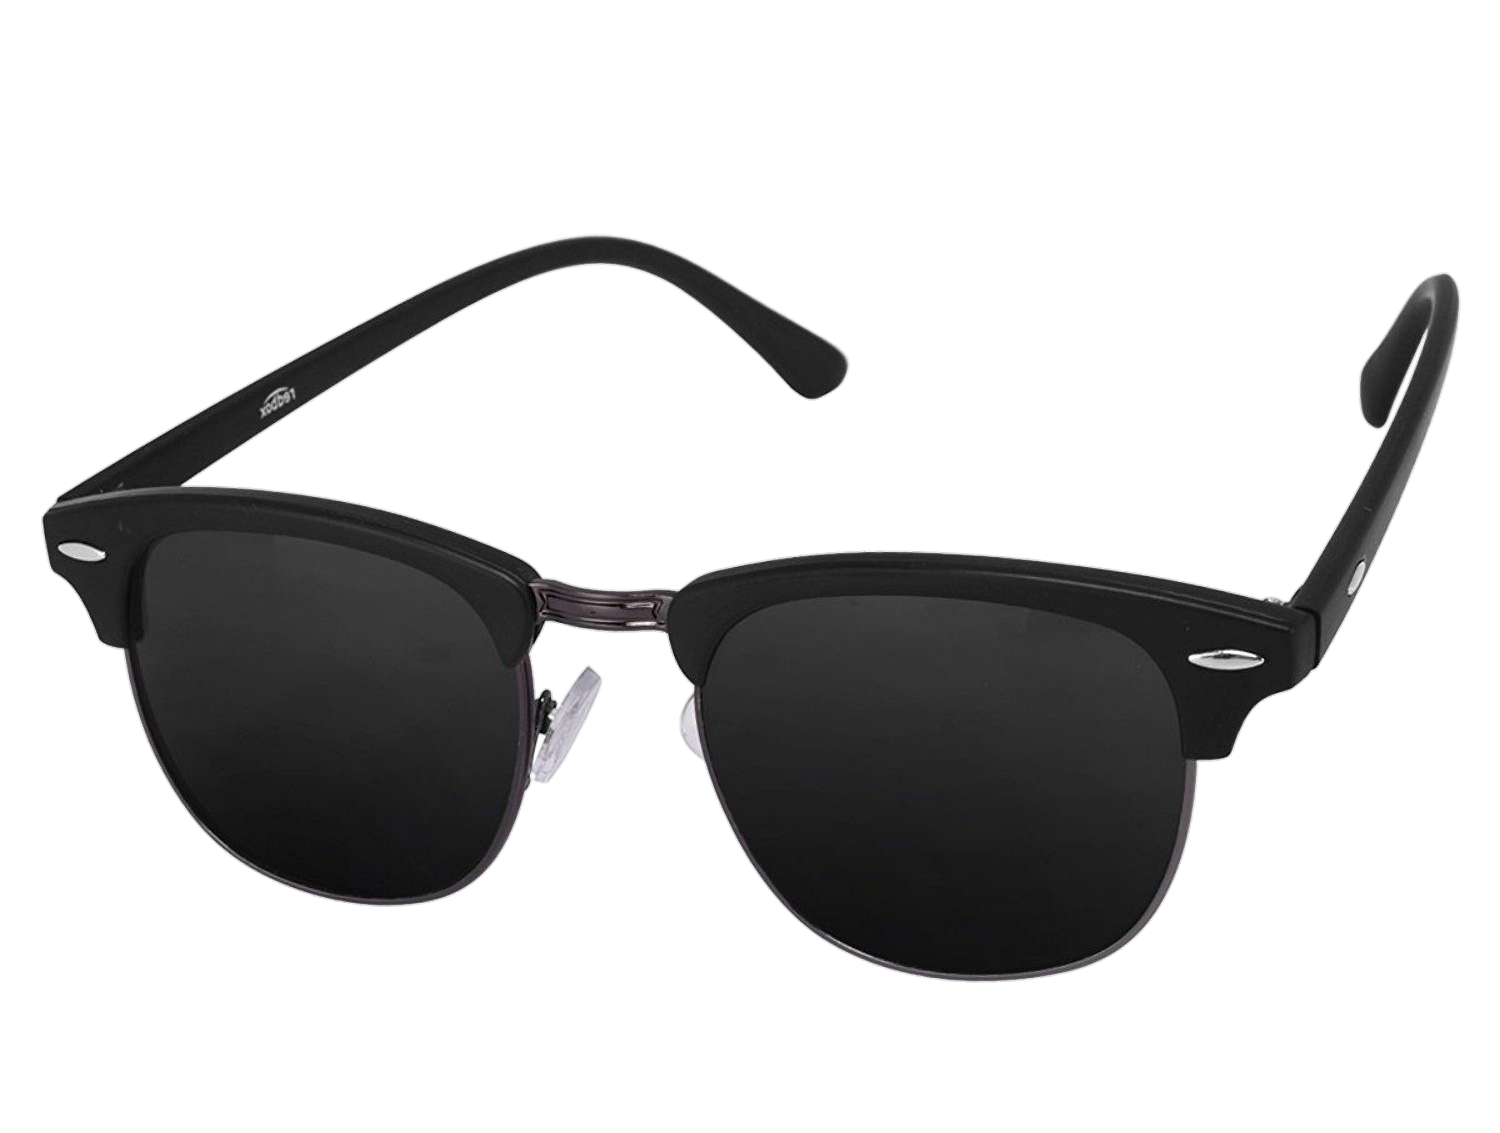 sunglasses-png-from-pngfre-13